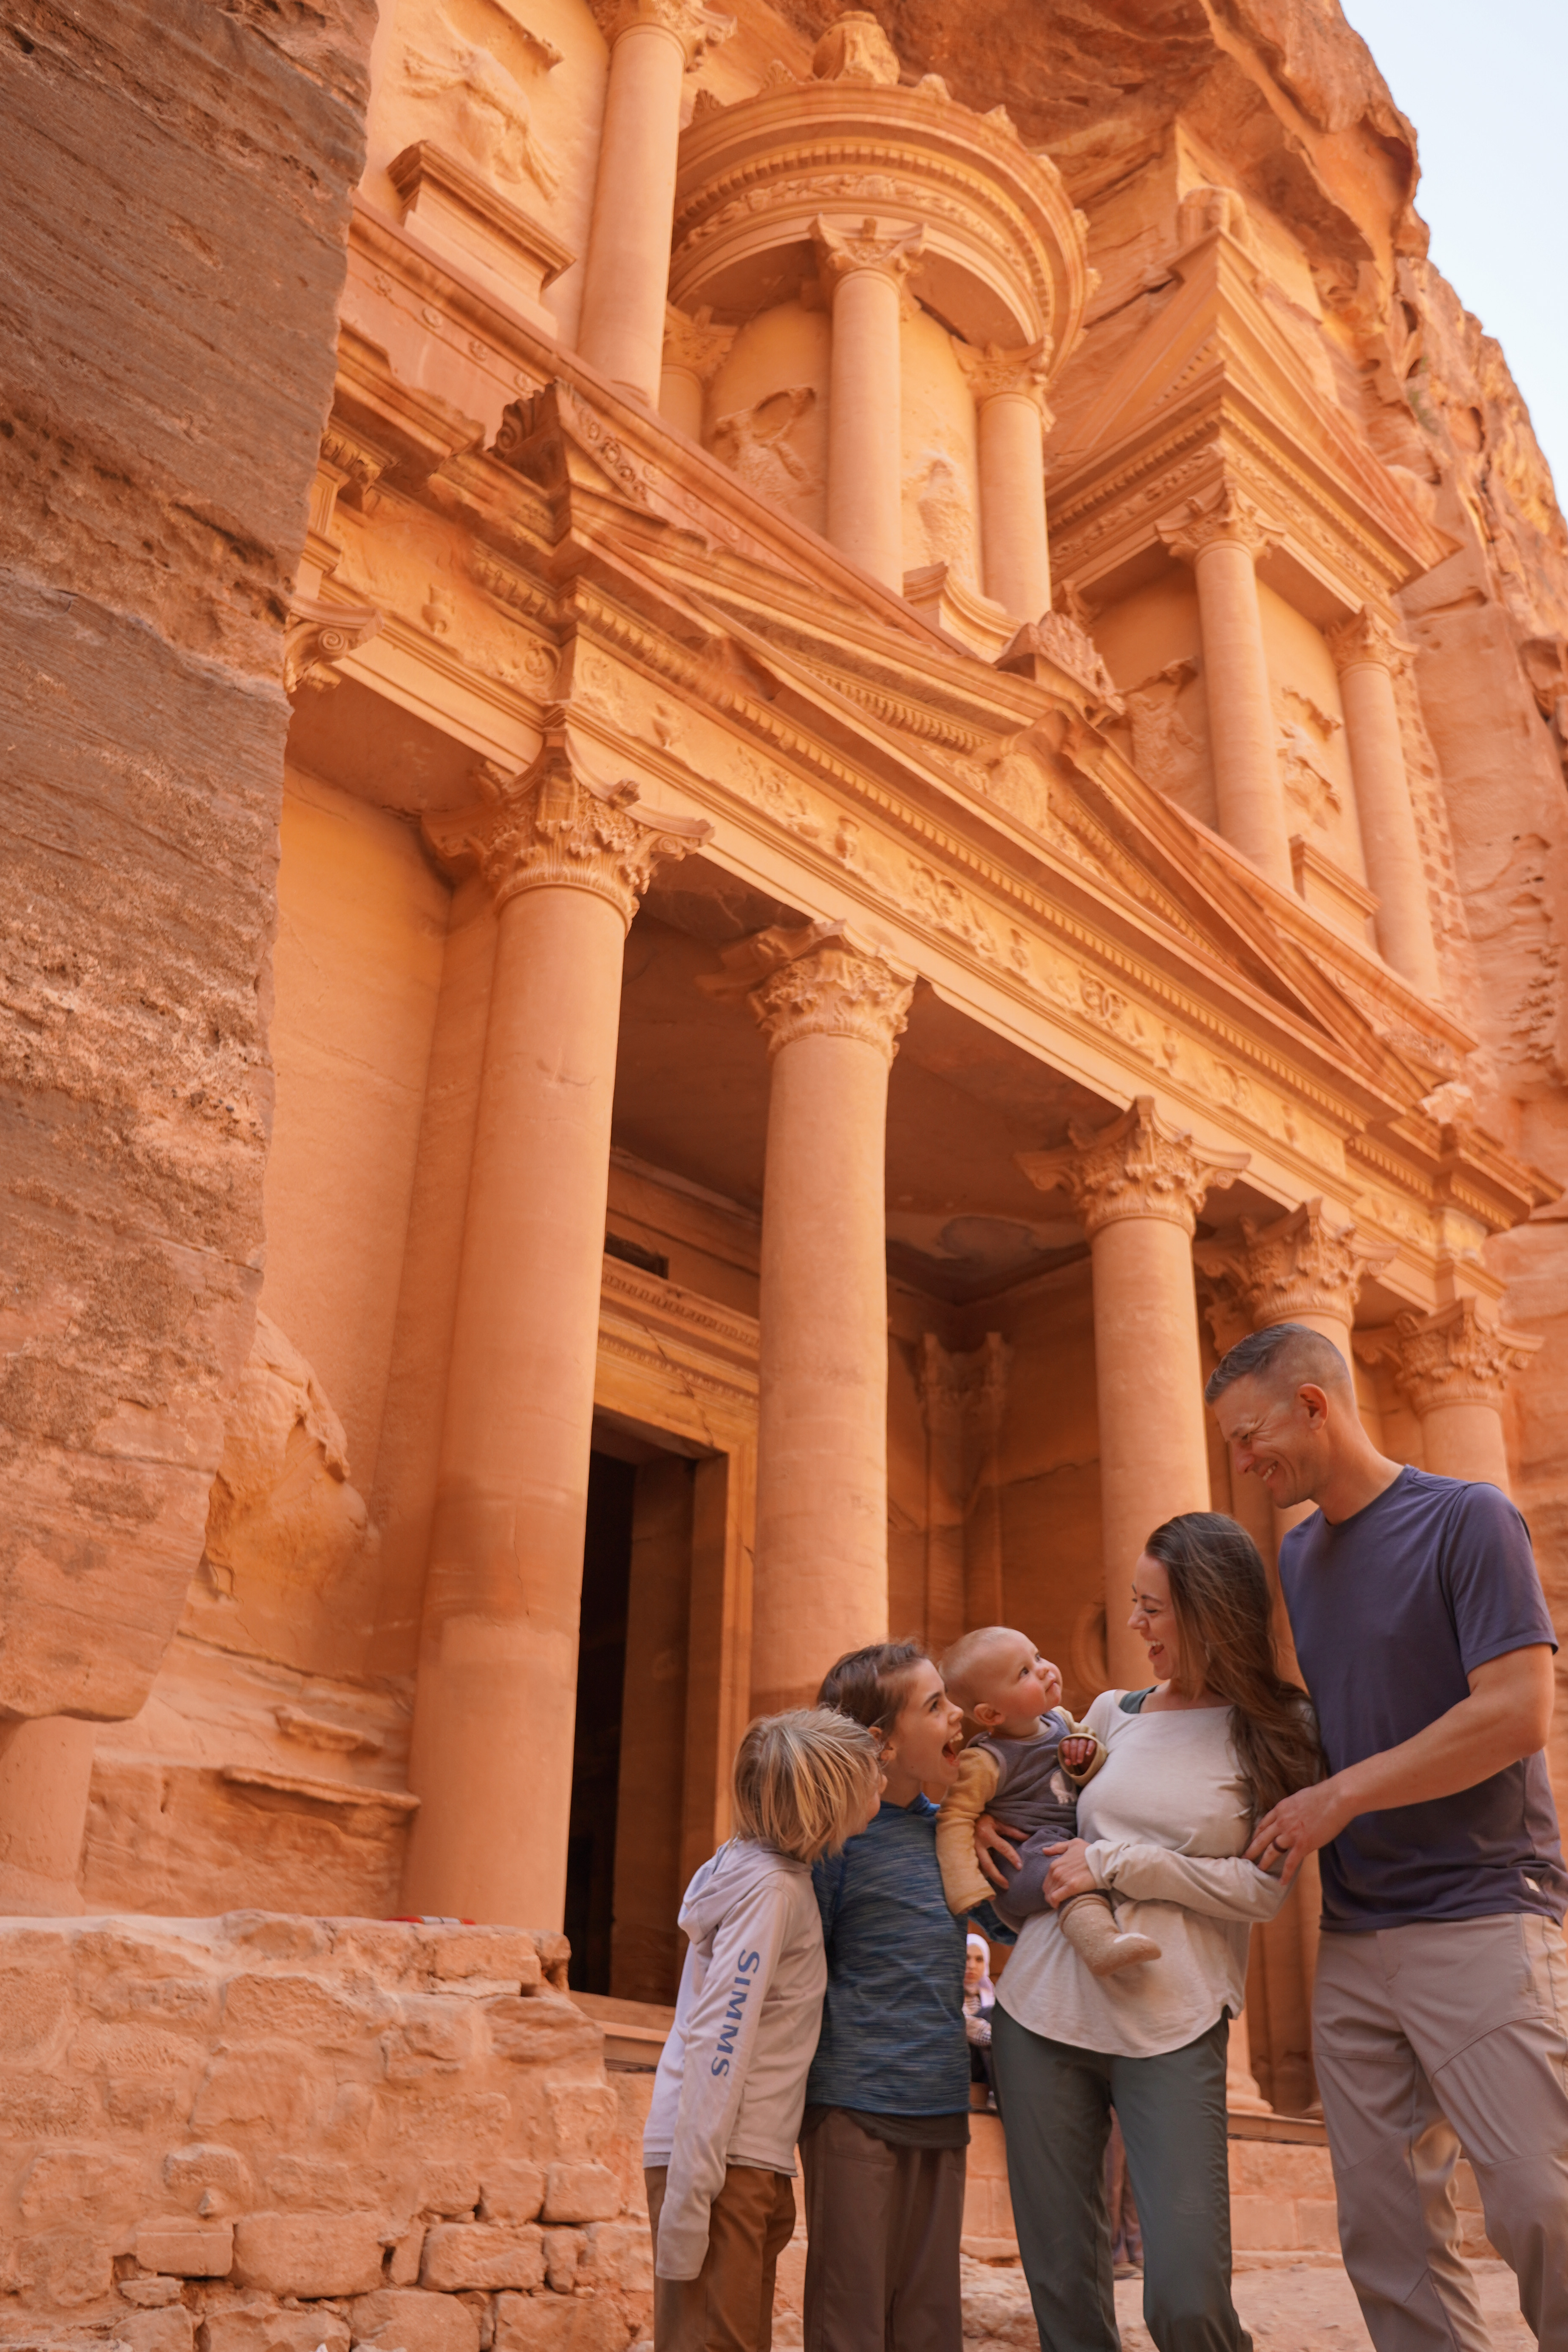 The Treasury and The Monastery are two of the most iconic monuments in Petra.